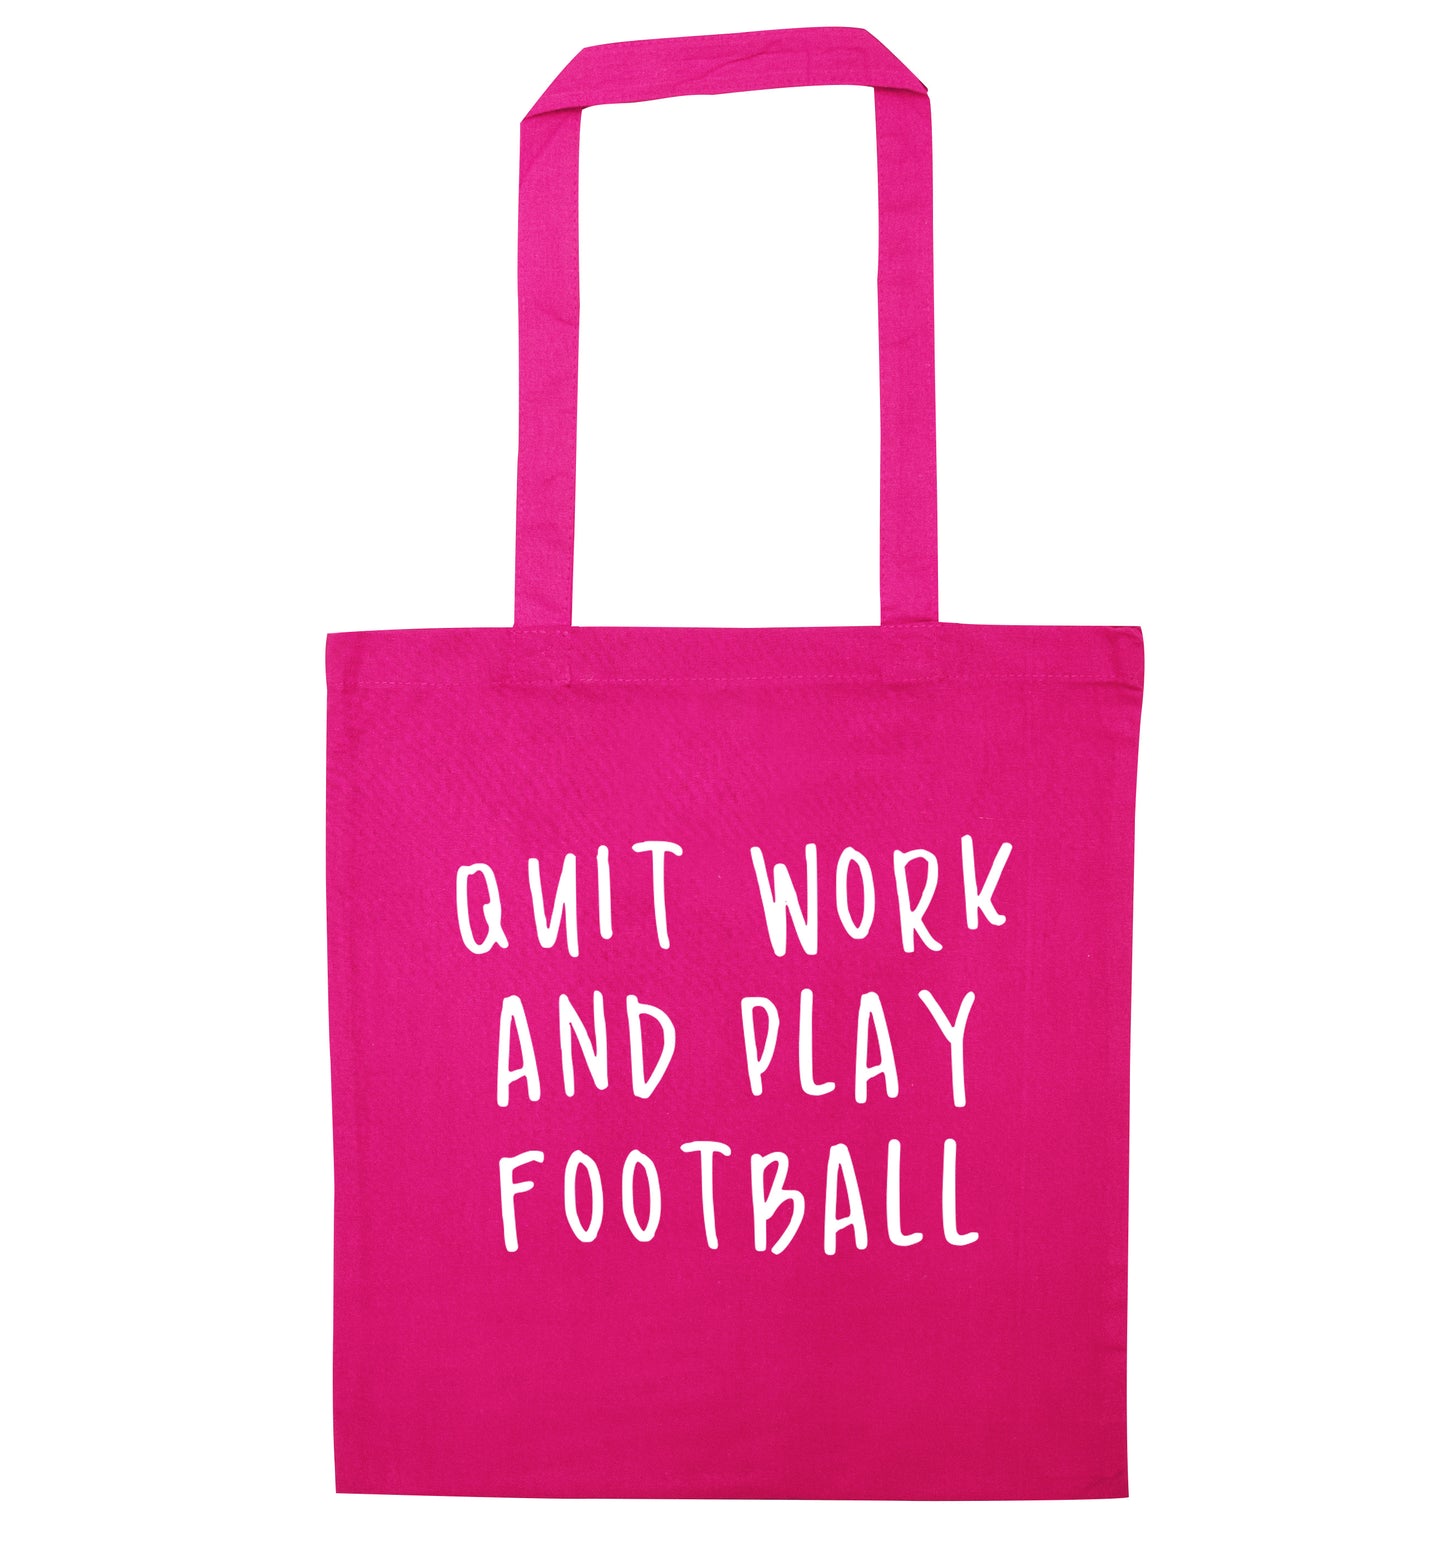 Quit work play football pink tote bag